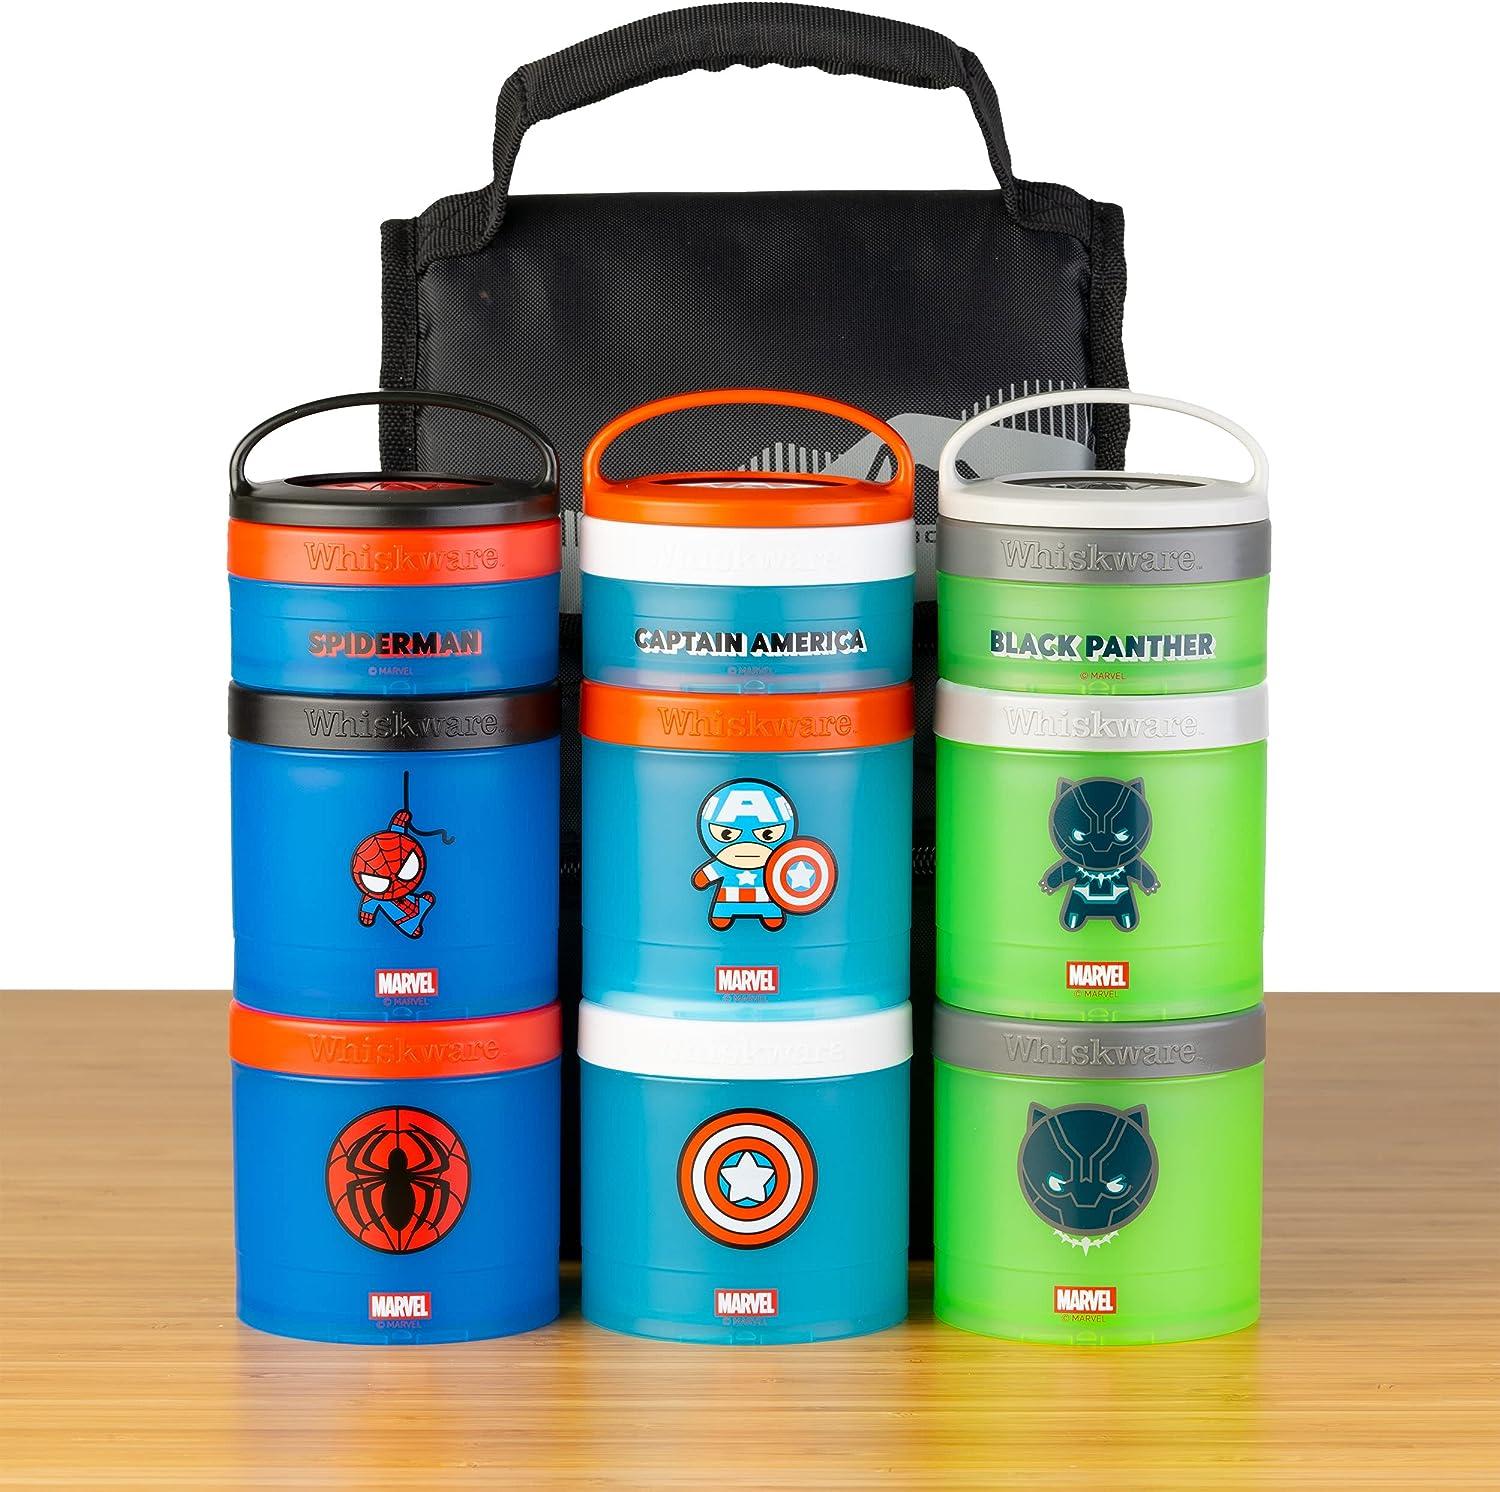 Whiskware Star Wars Combo Snack Pack Lunch Set (Assorted Colors